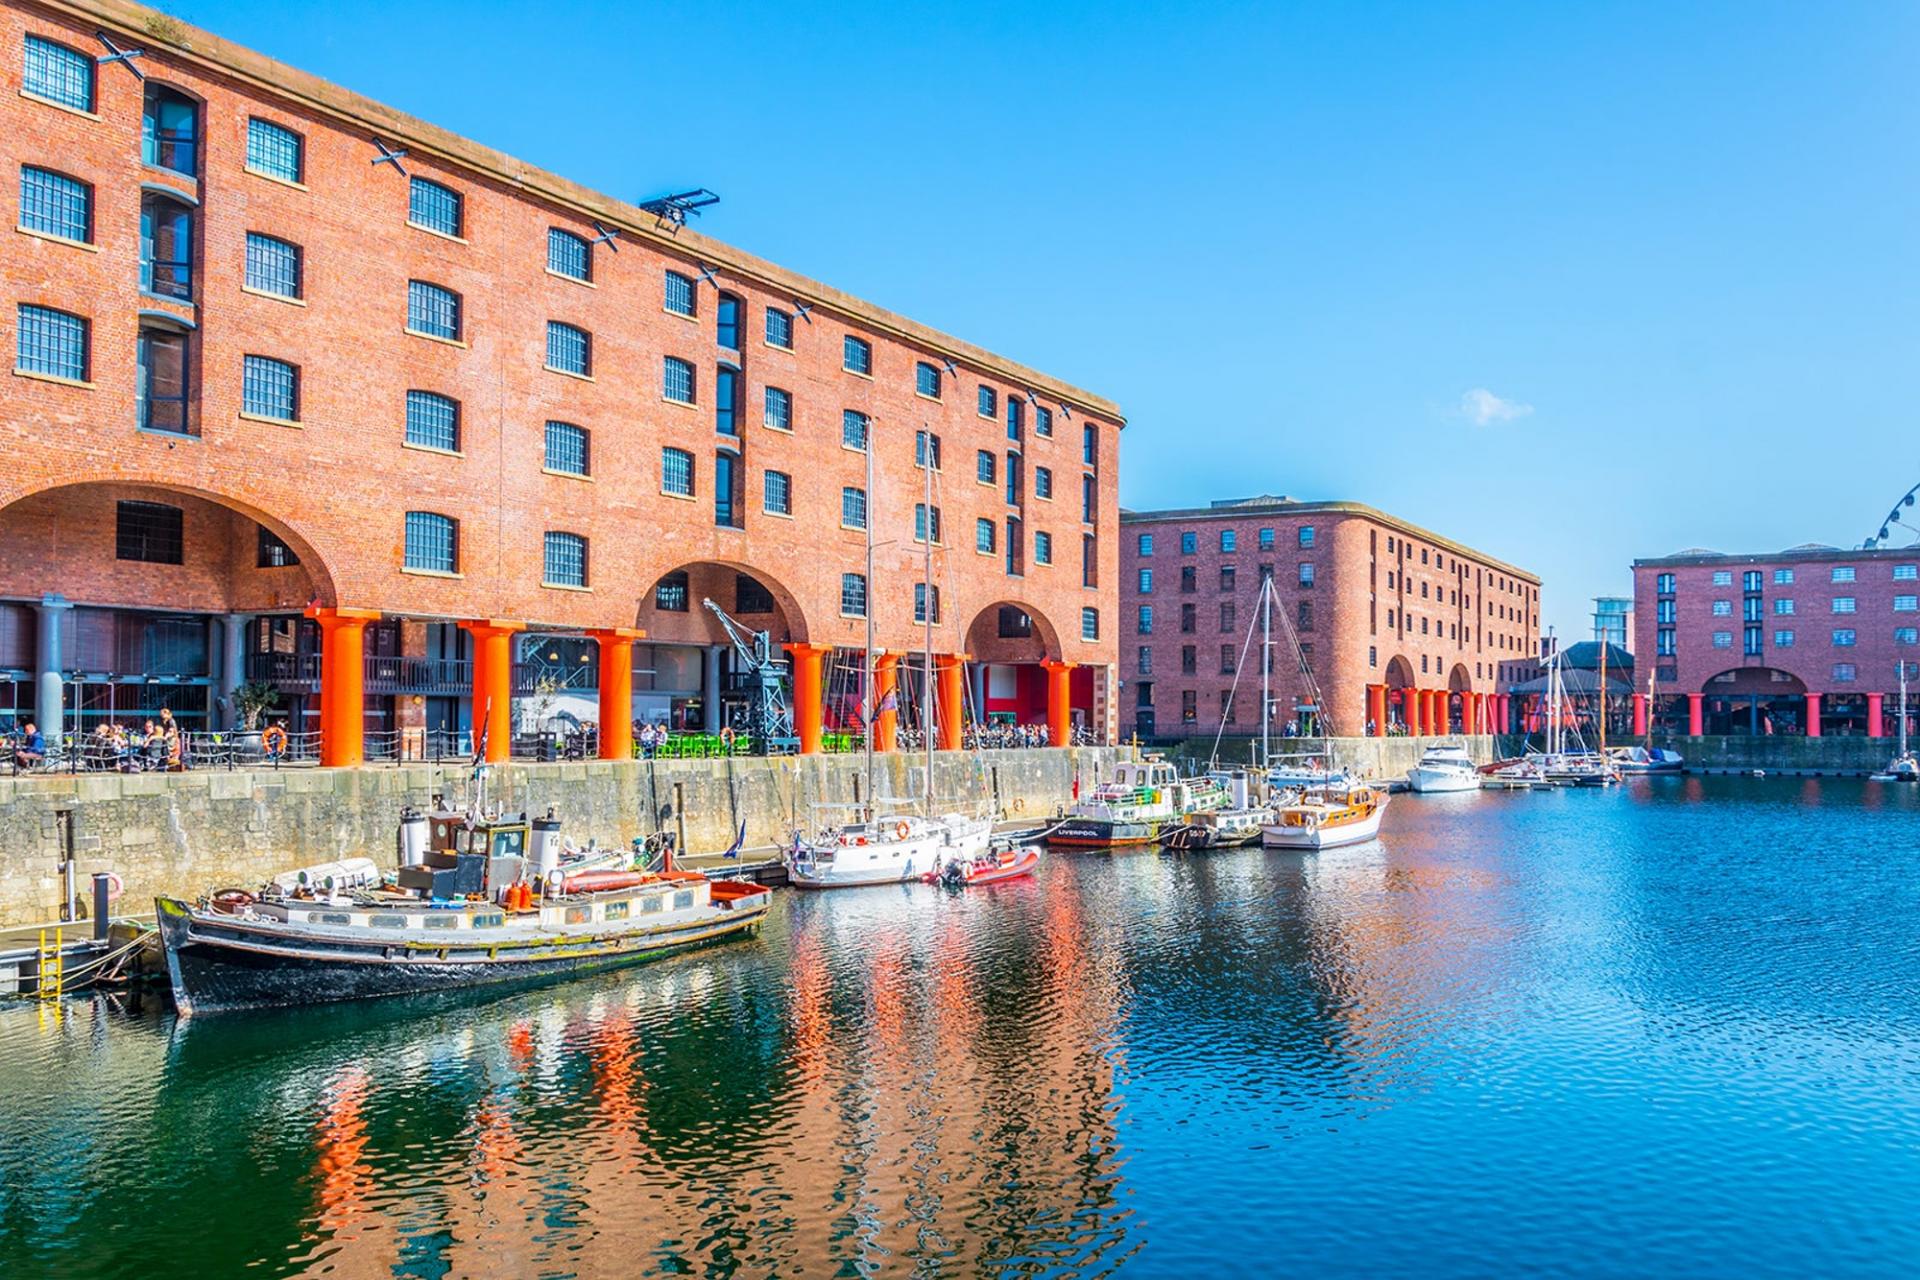 Liverpool’s Royal Albert Dock for sale at under £50m 